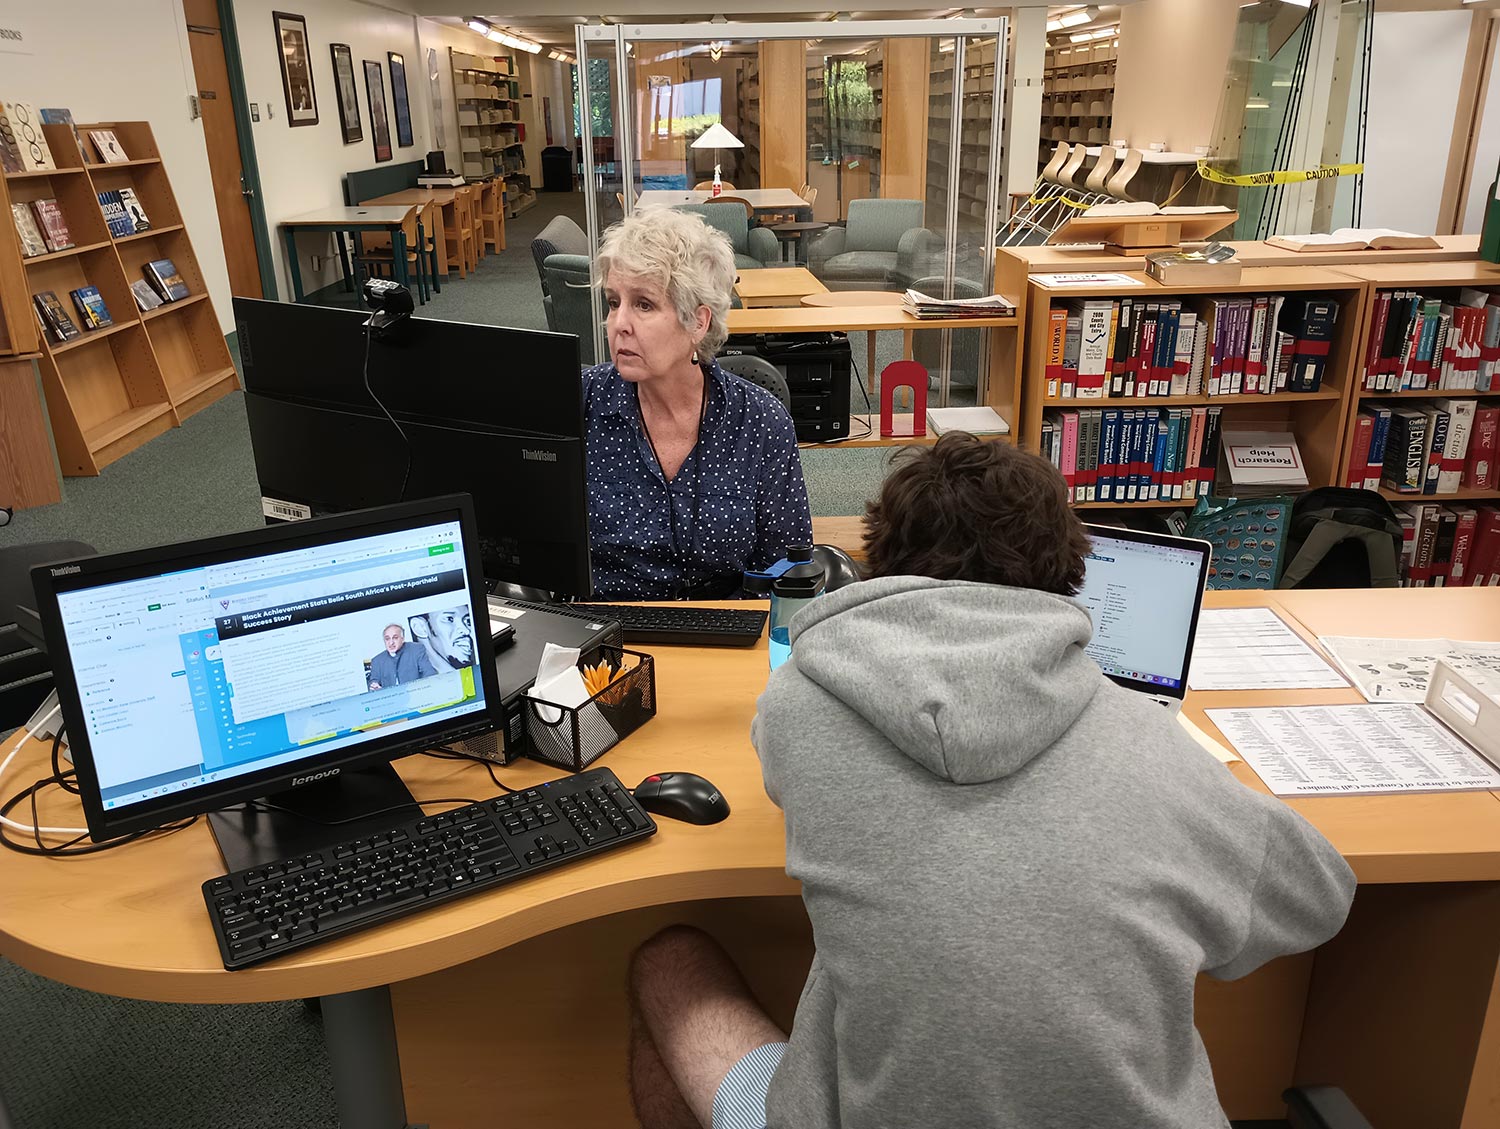 Student working with research librarian